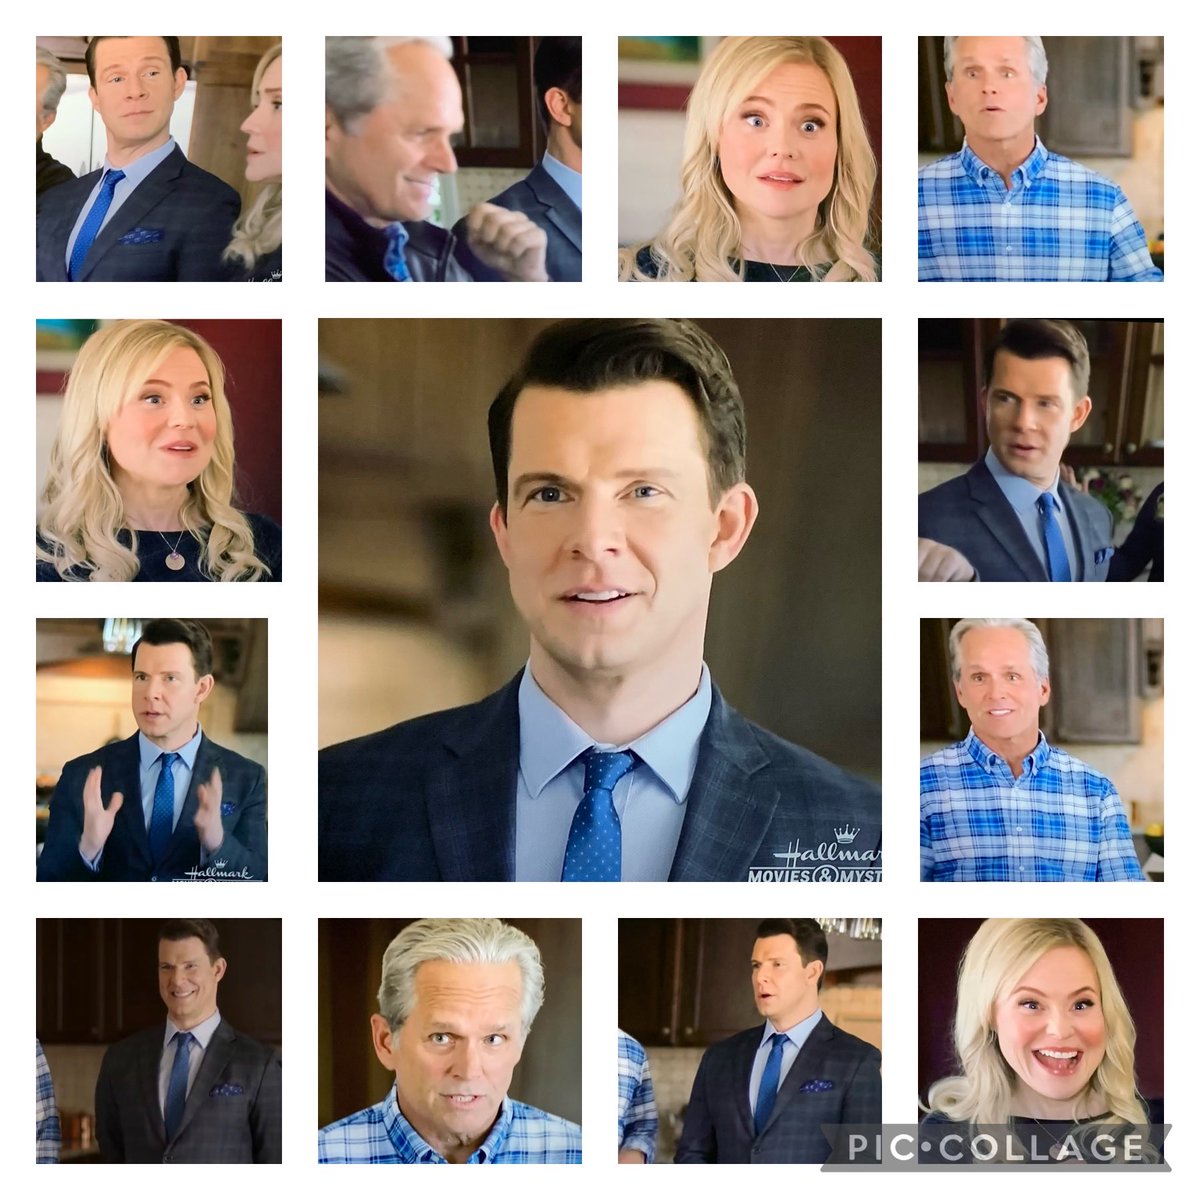 #POstables #ToTheAltar Here’s a little gift to make you smile this afternoon . Love the Ugly Green Tie story! ⁦@kristintbooth⁩ ⁦@Eric_Mabius⁩ ⁦@TheRealGregoryH⁩ ⁦@MarthaMoonWater⁩ #WeAreFOREVERPOstables